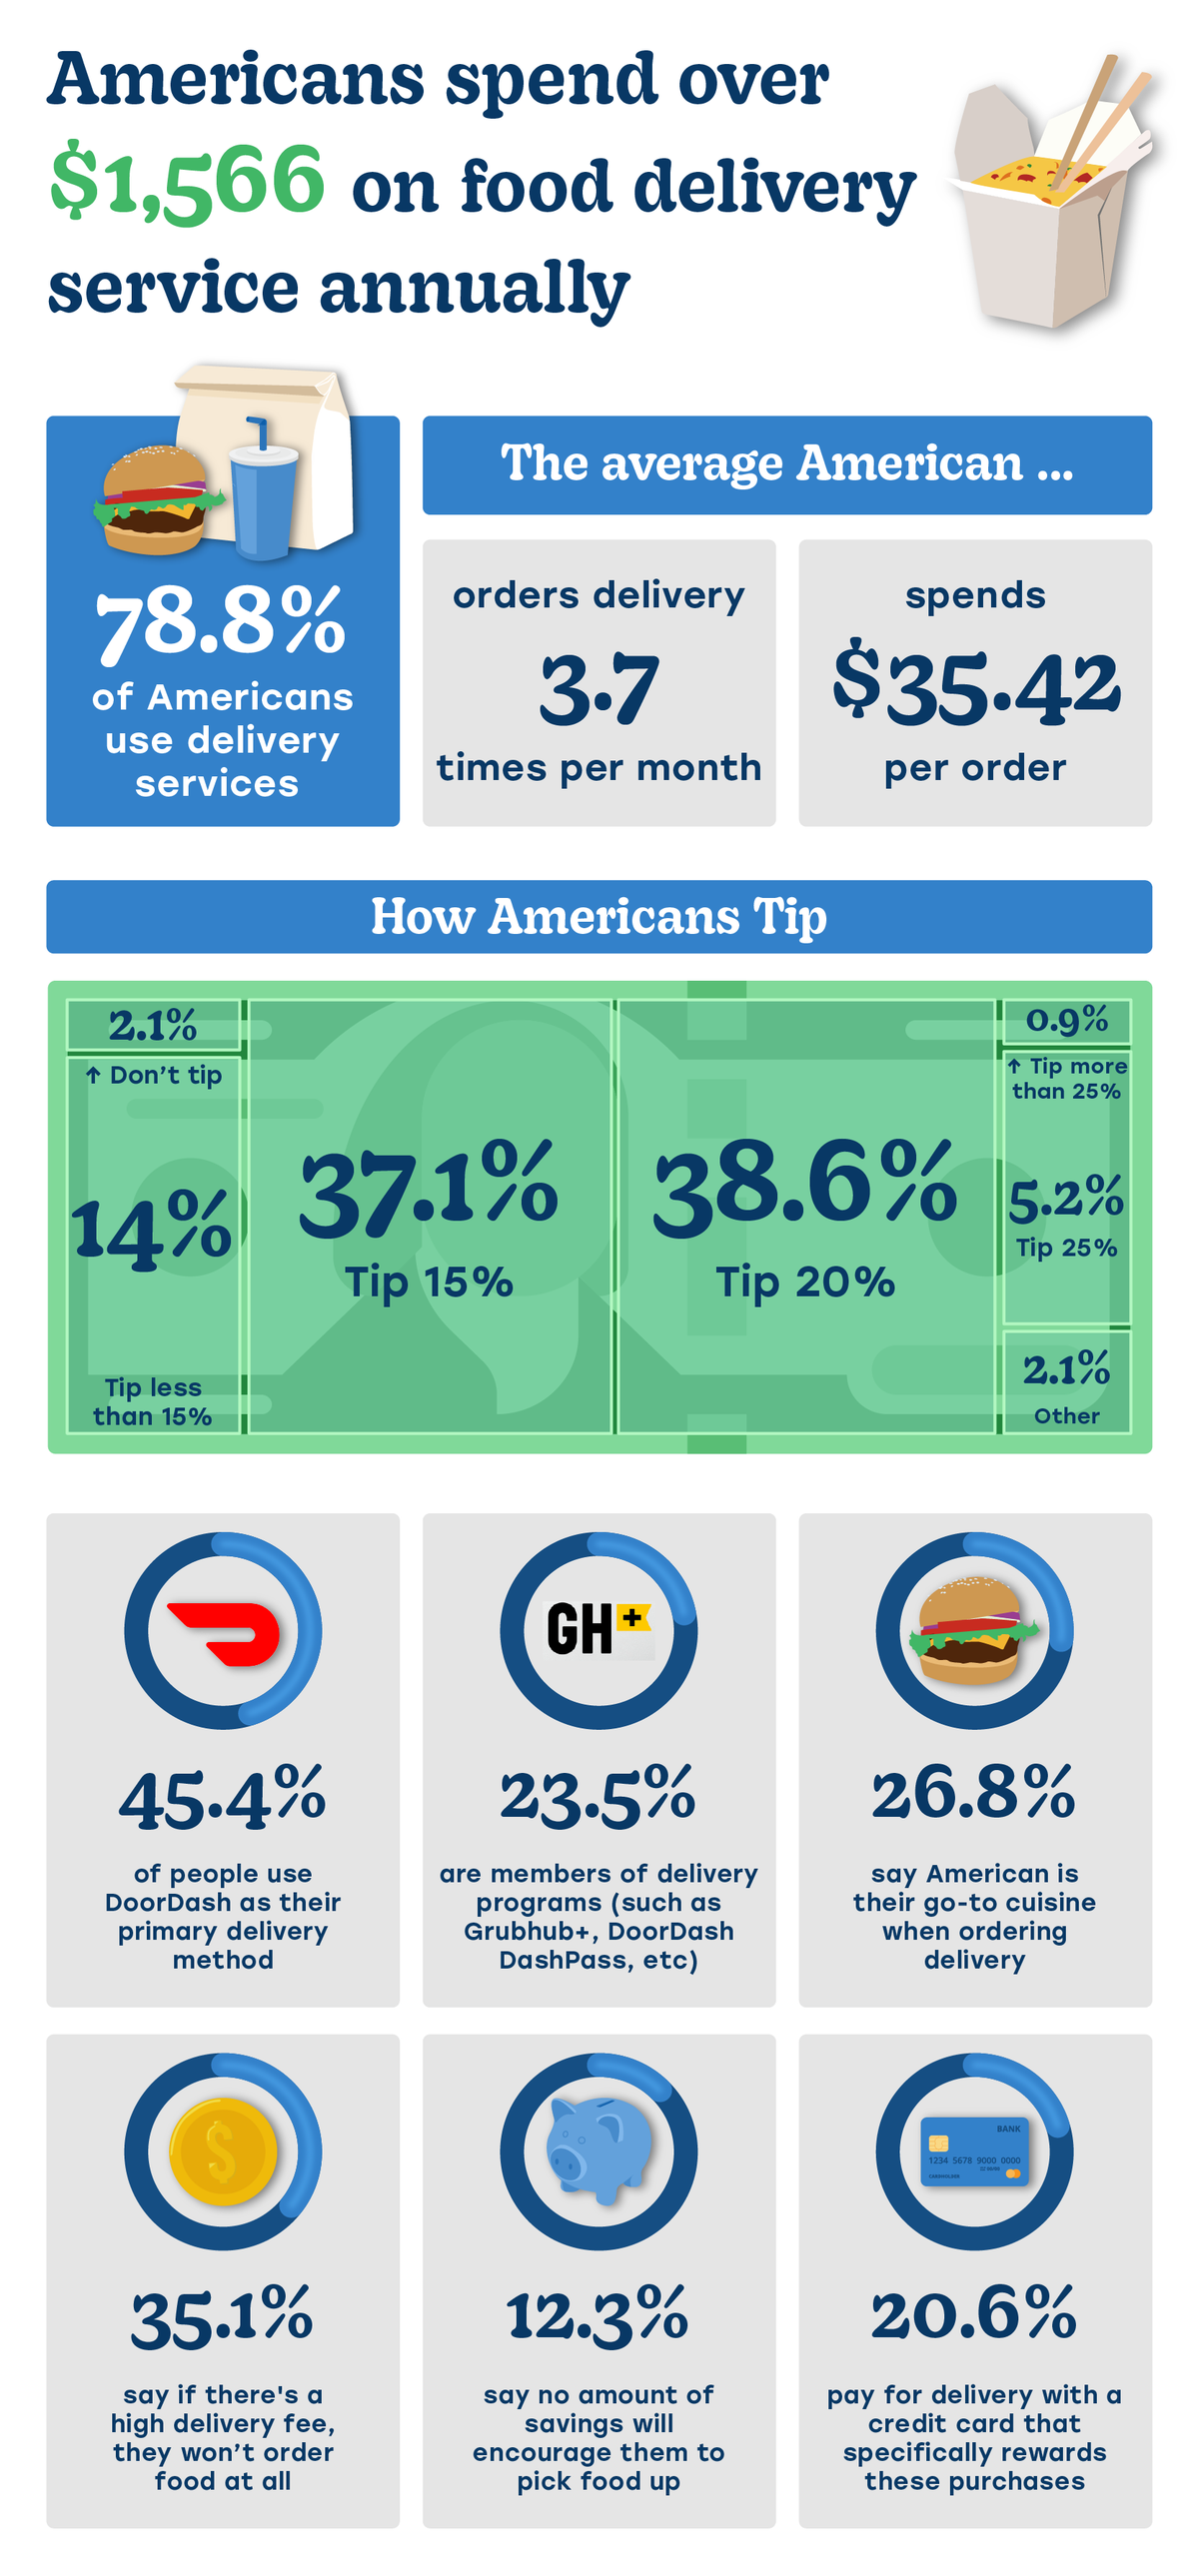 Infographic displaying Americans' delivery and tipping habits